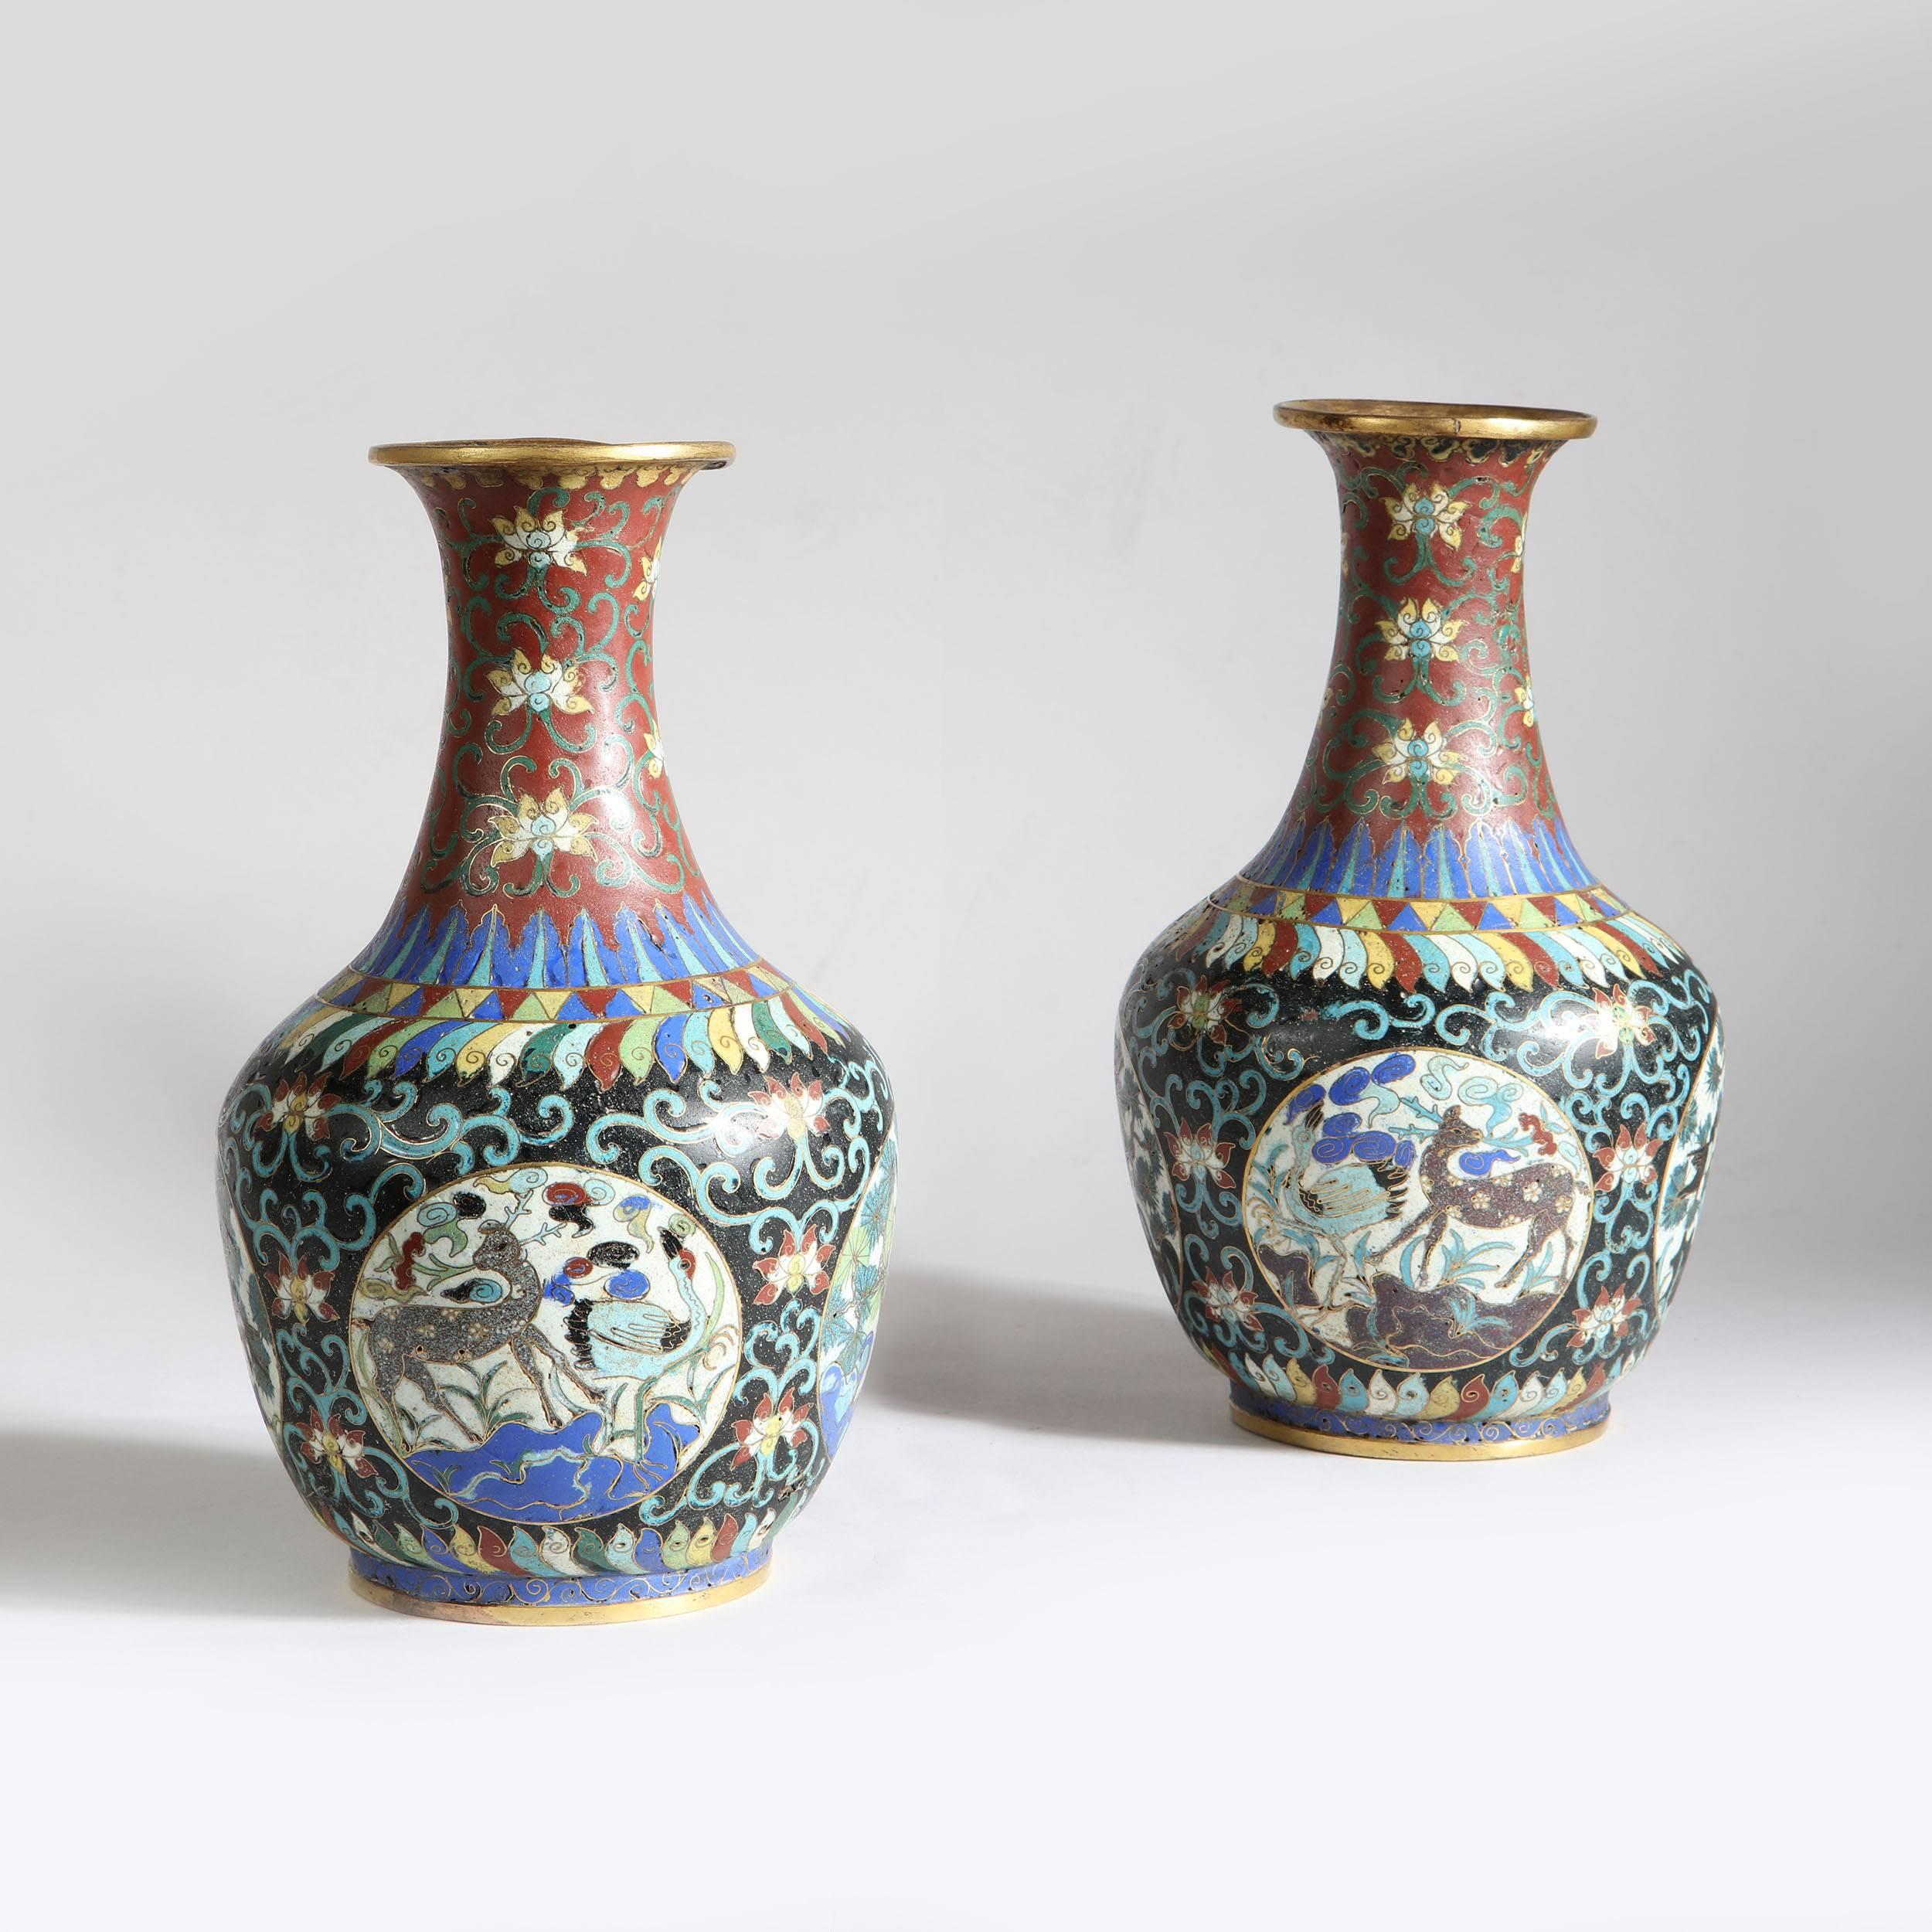 A pair of late 19th century Chinese cloisonne bottle vases, decorated with scenes of deer and birds amongst tropical flora.